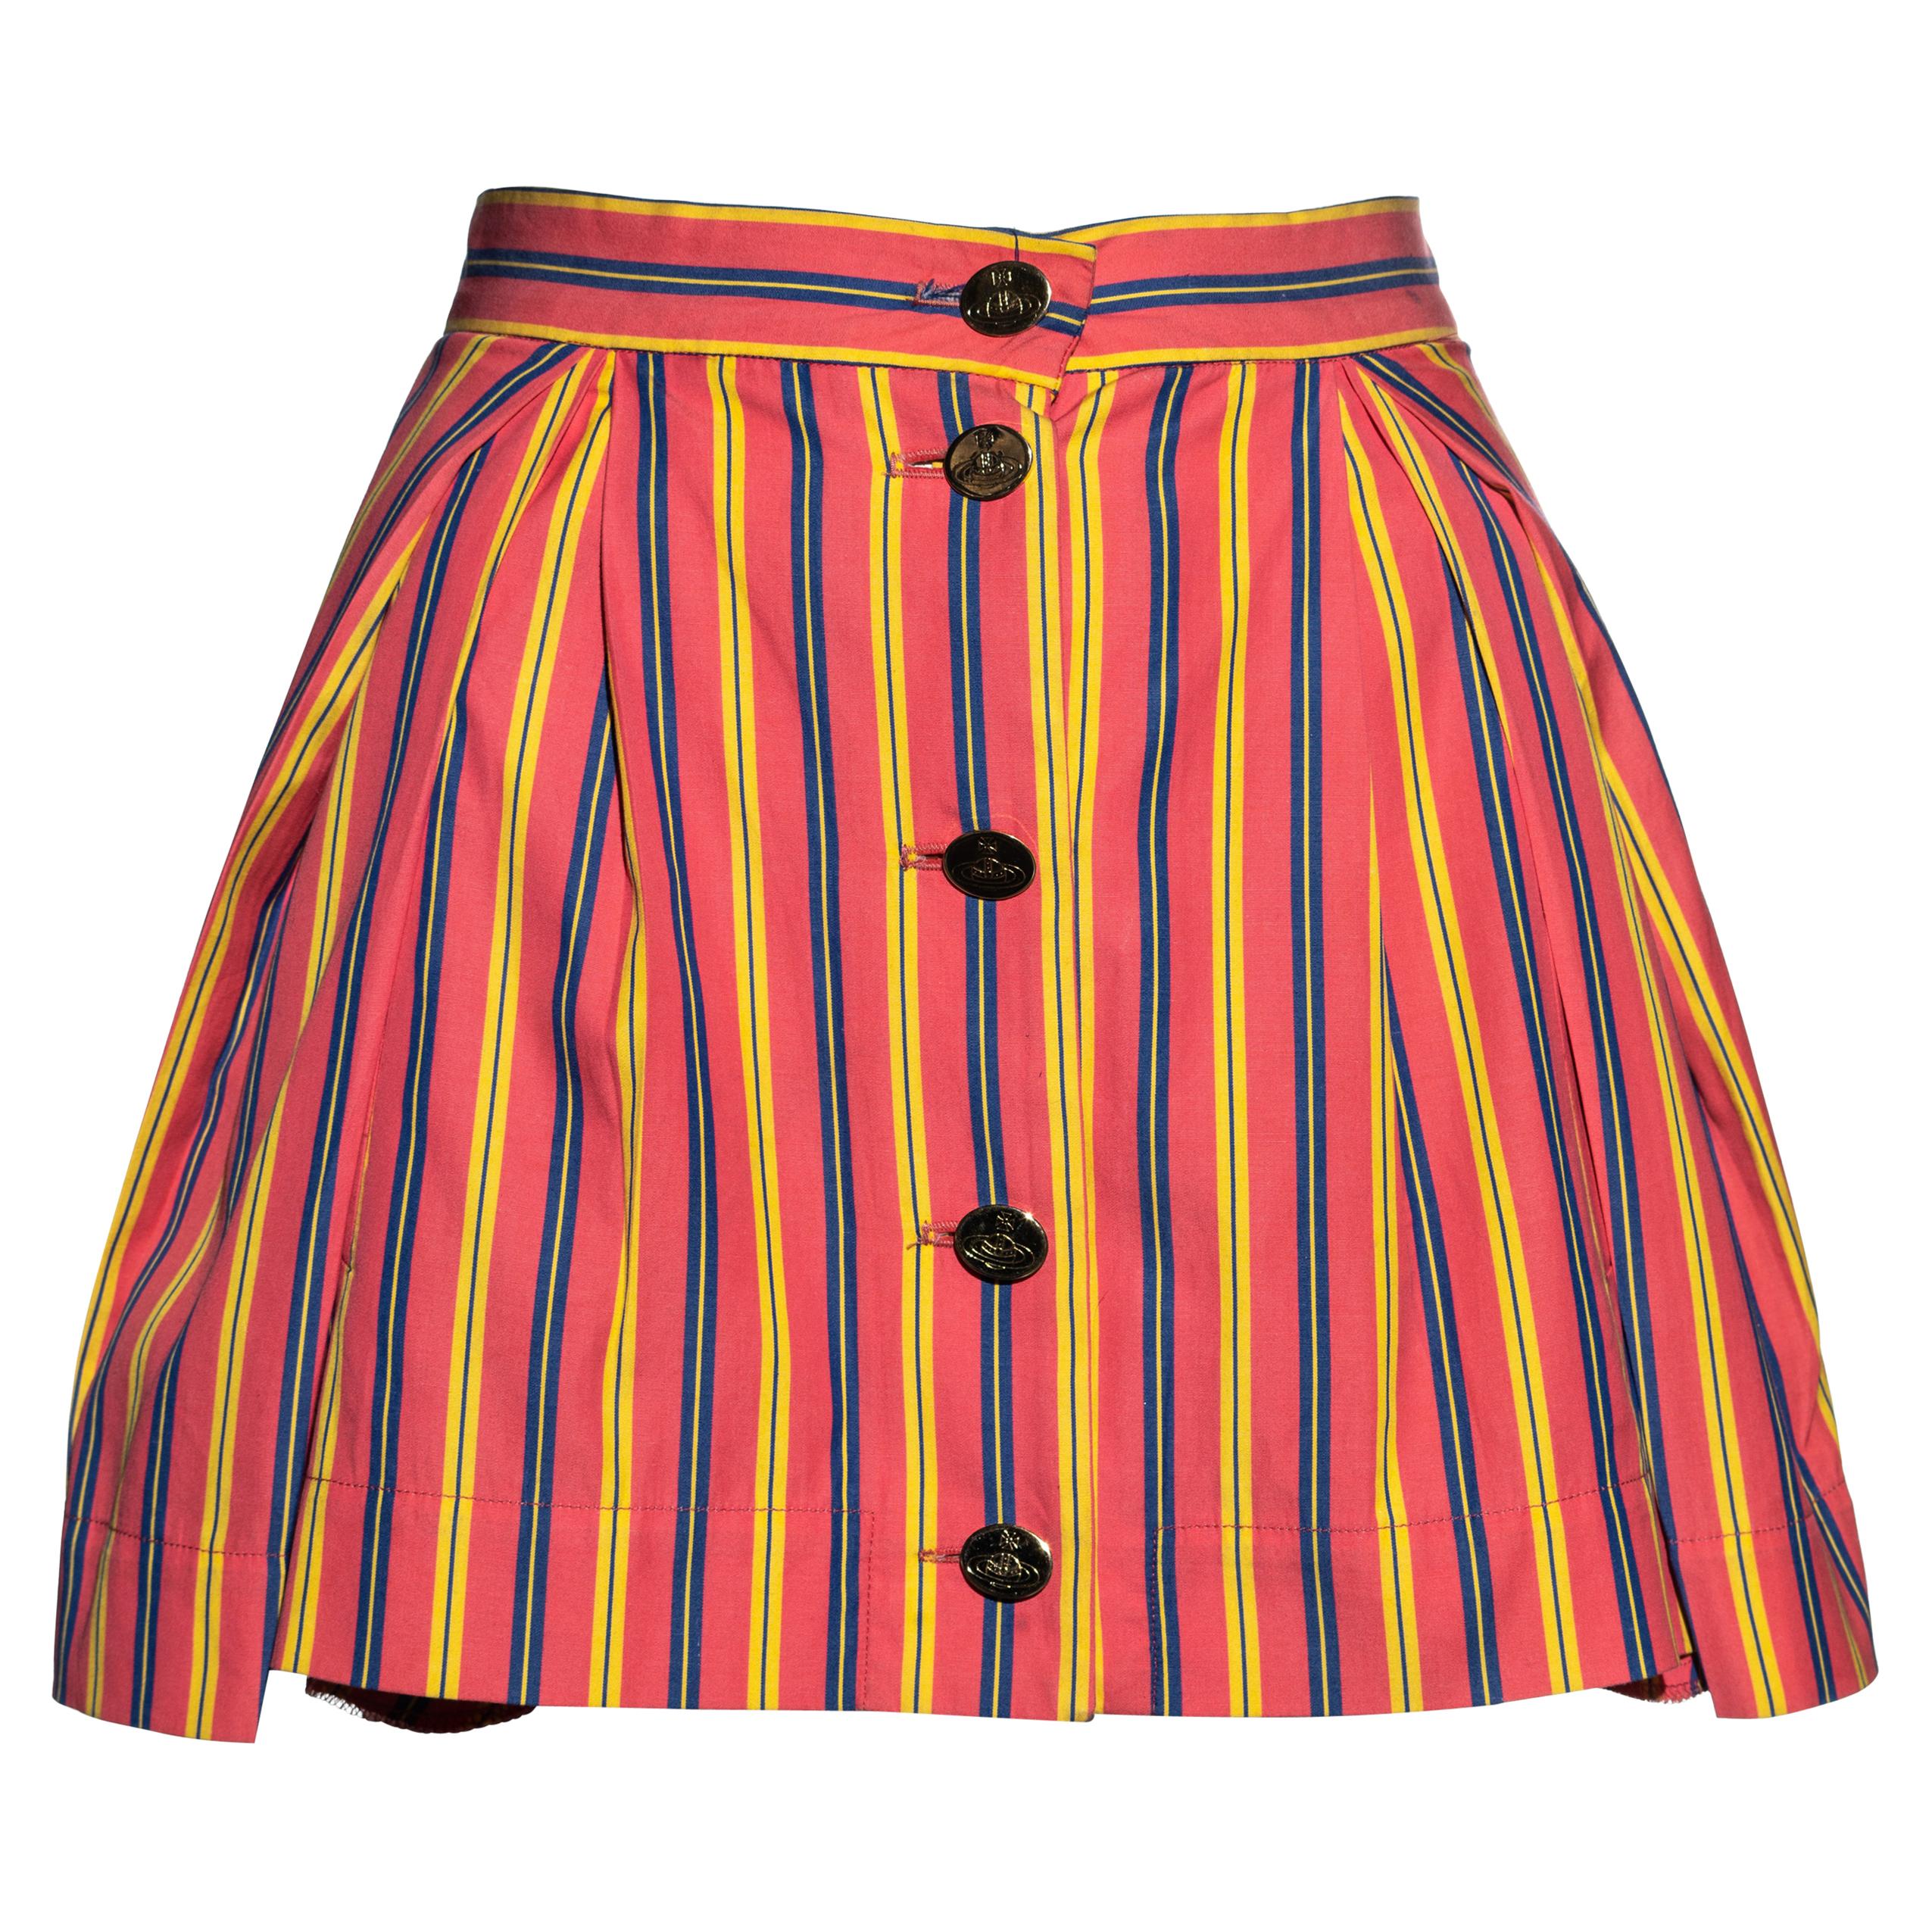 Vivienne Westwood salmon pink striped cotton pleated mini skirt, ss 1993 For Sale